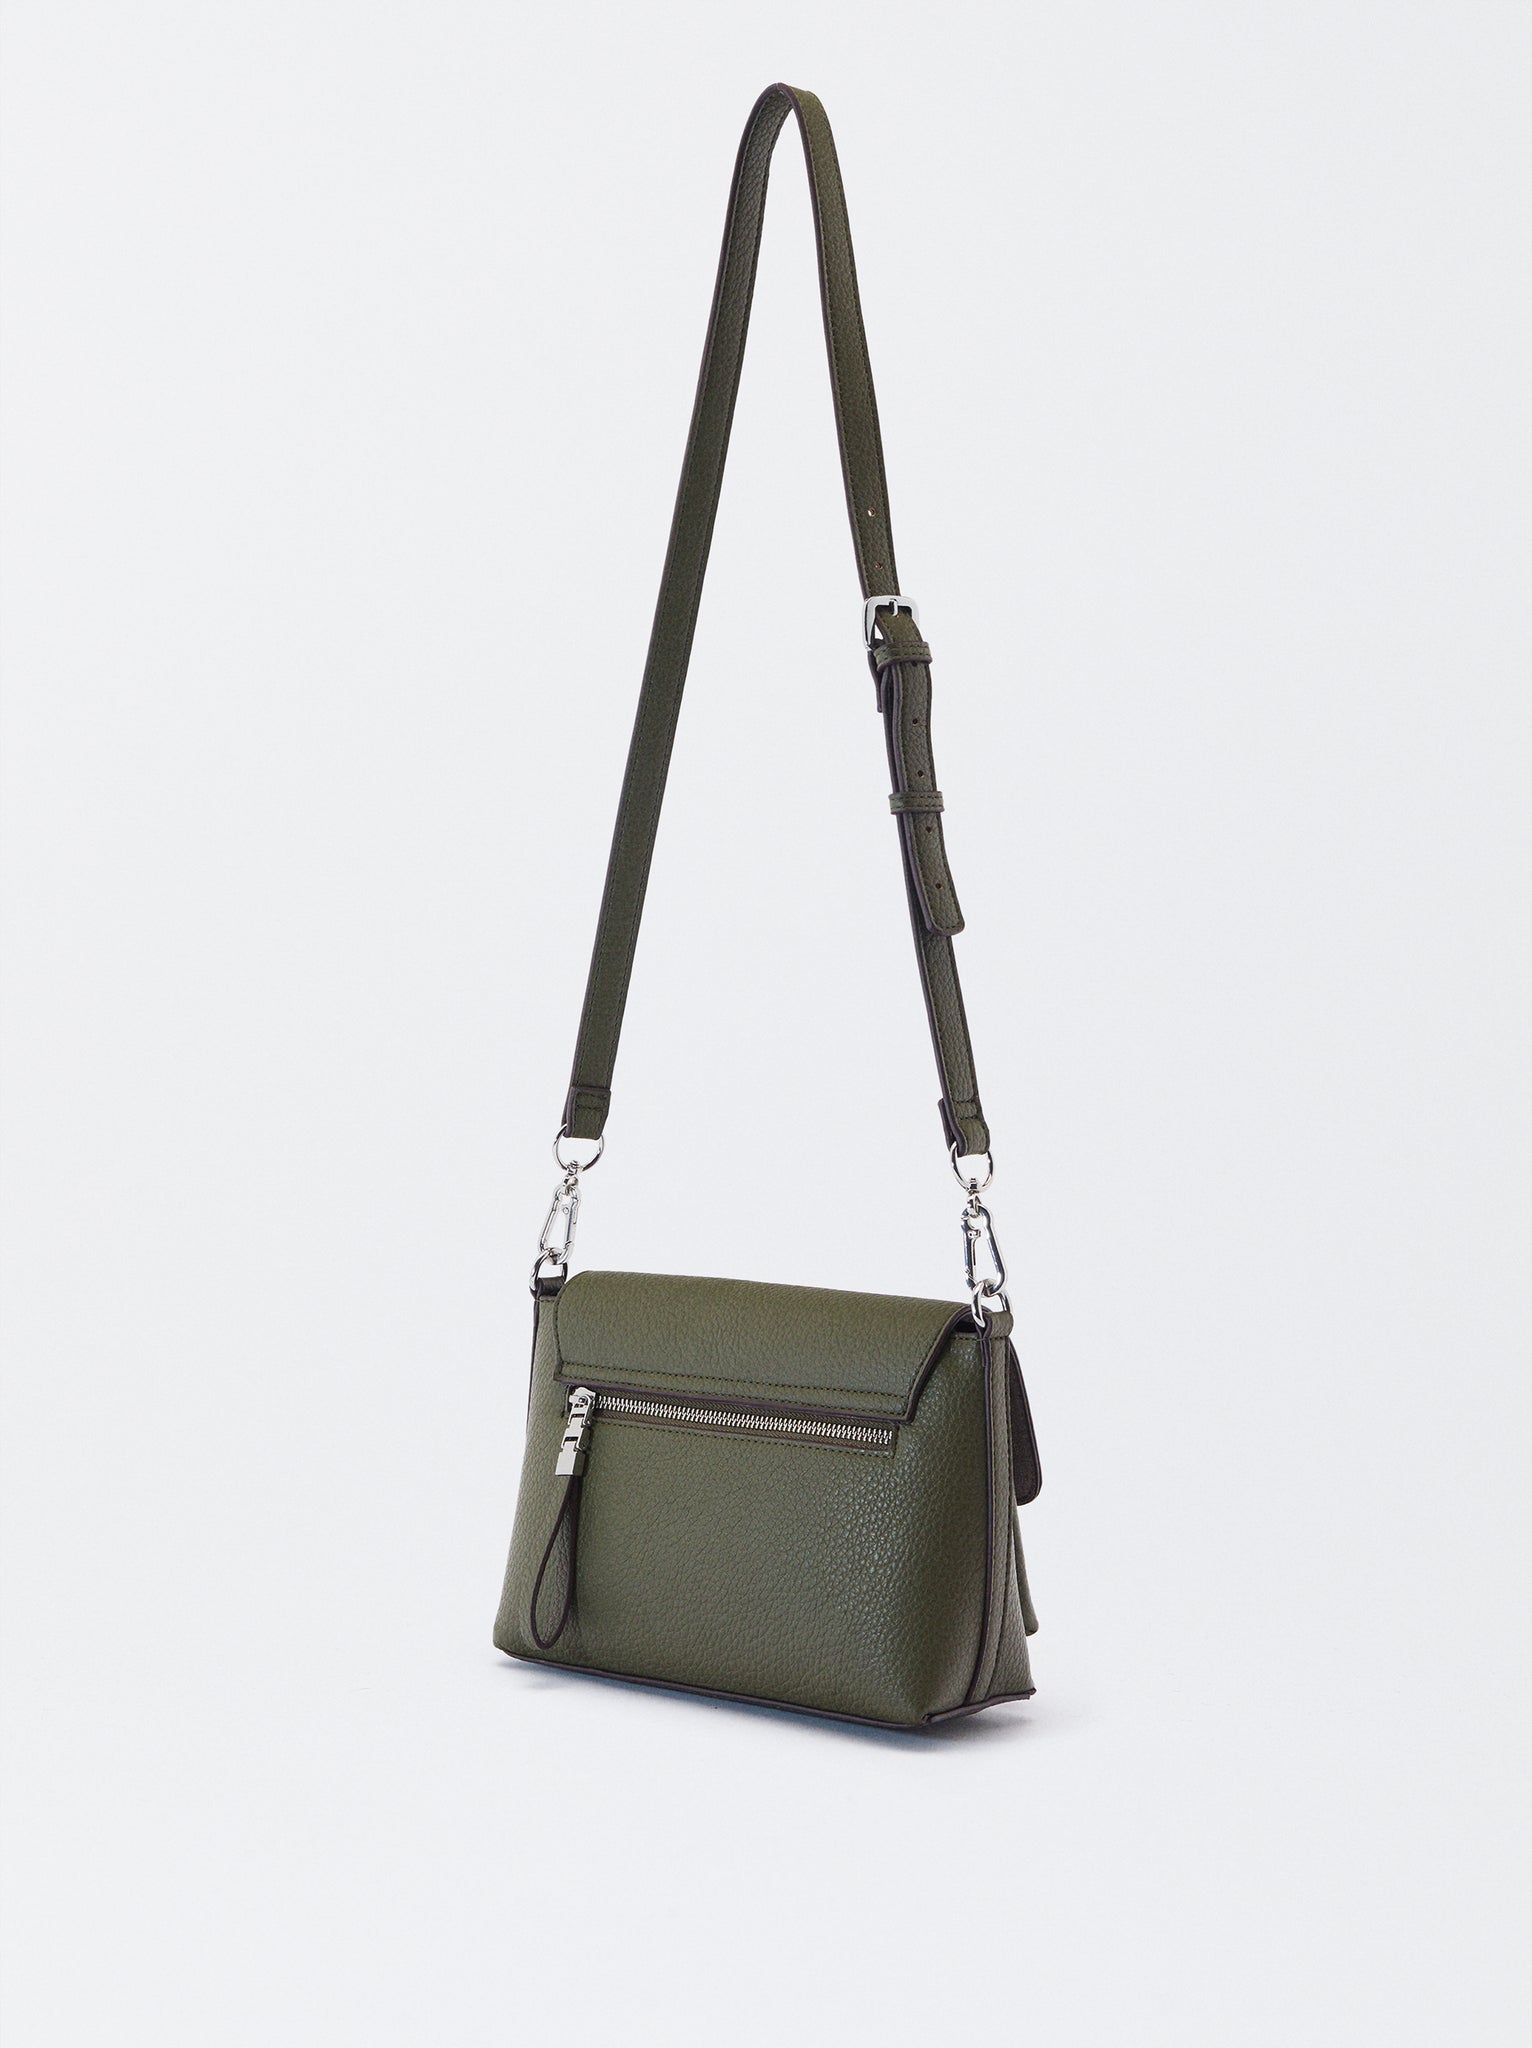 Crossbag With Flap Closure